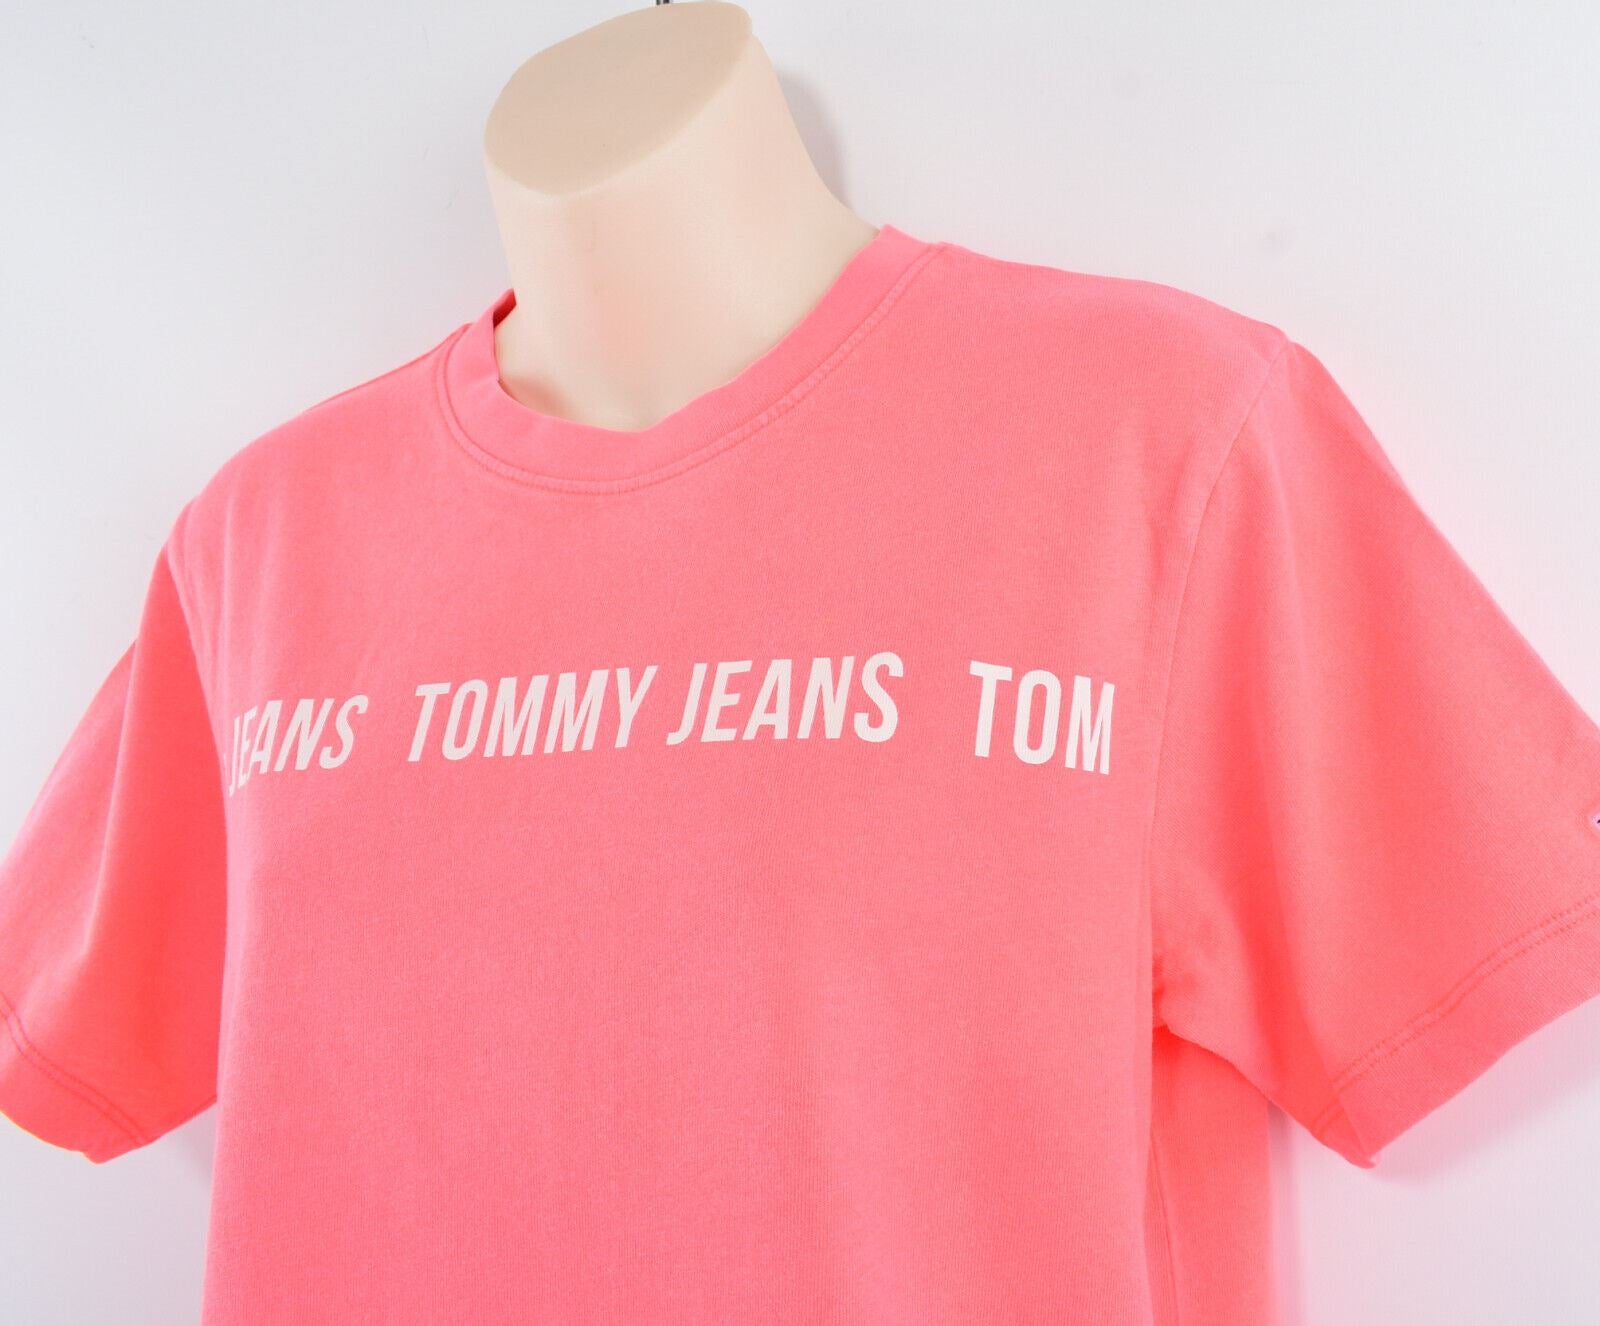 TOMMY HILFIGER - TOMMY JEANS Women's Cropped Tee, Diva Pink, size XS